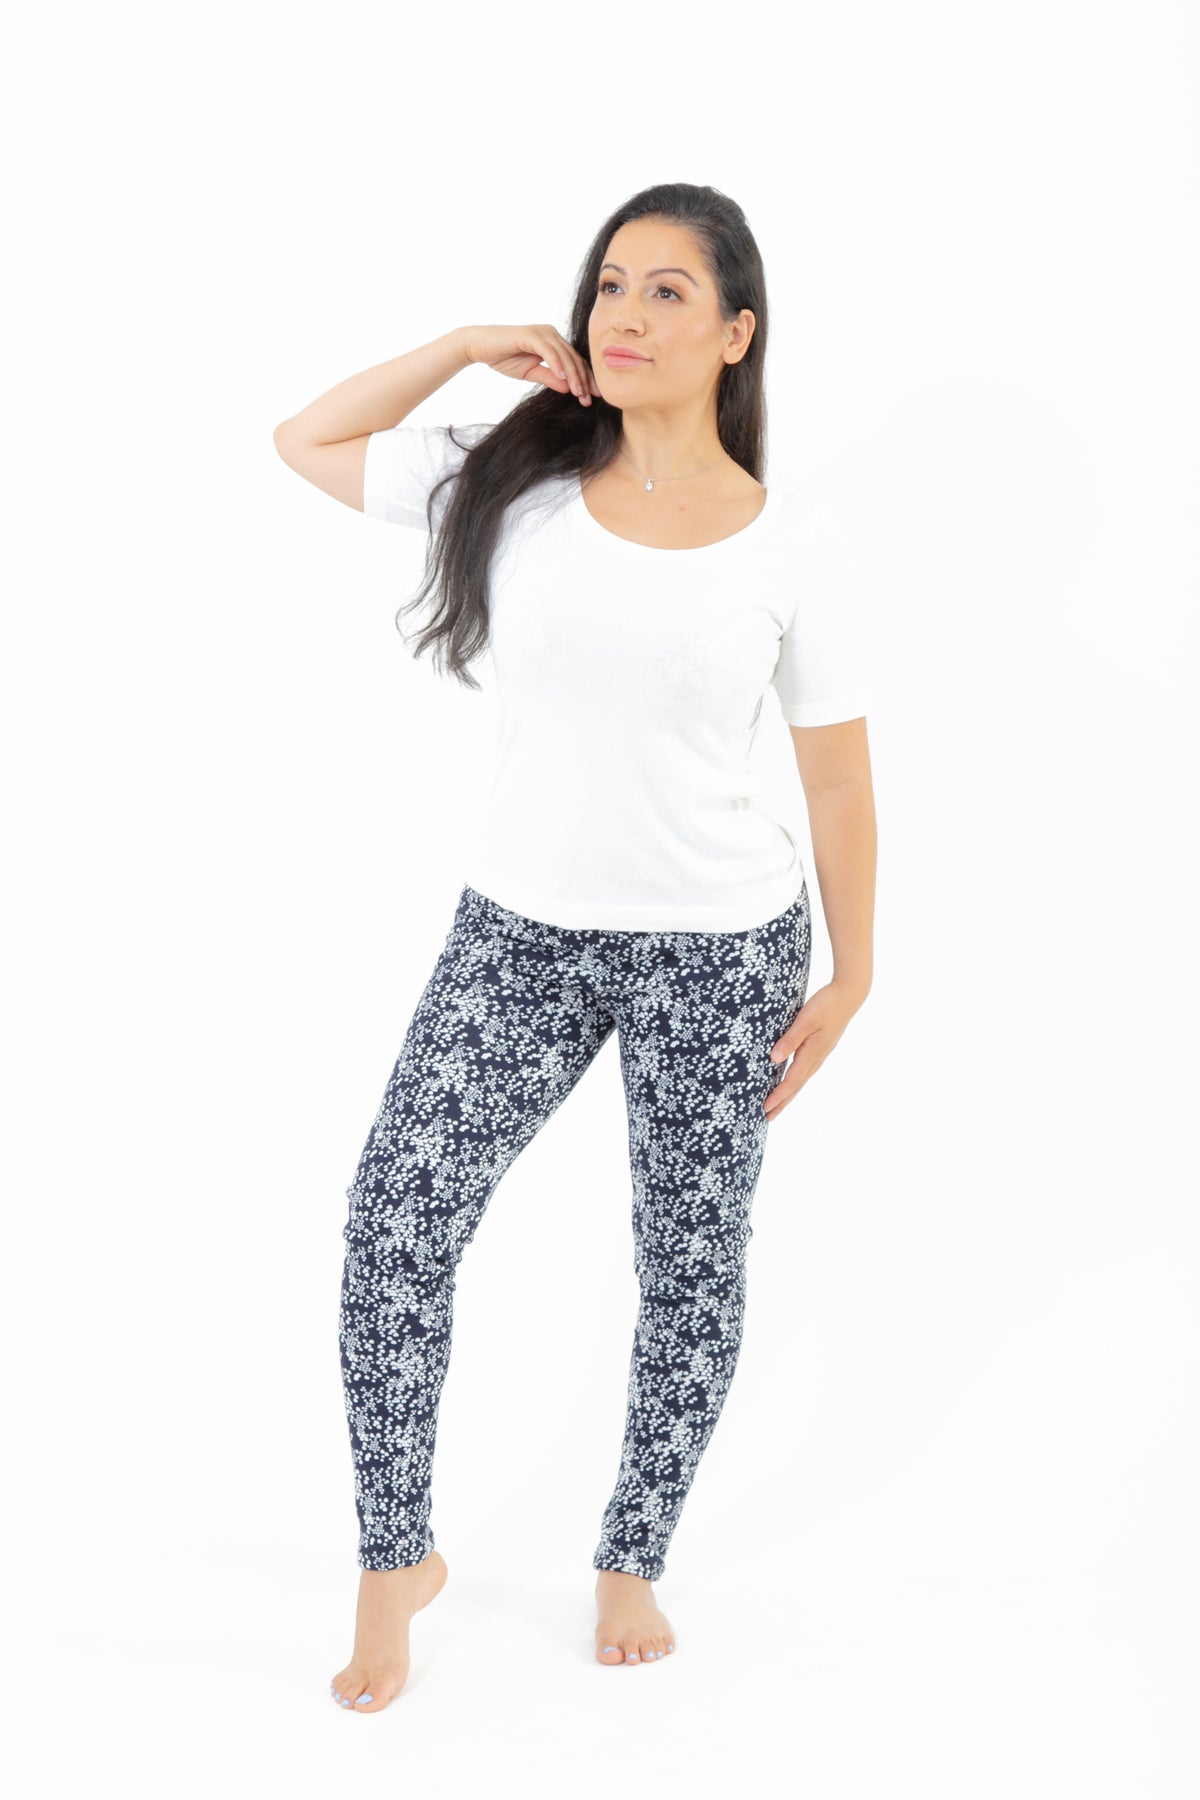 Cheap leggings: 's OnlyPuff leggings on sale for $26 and are